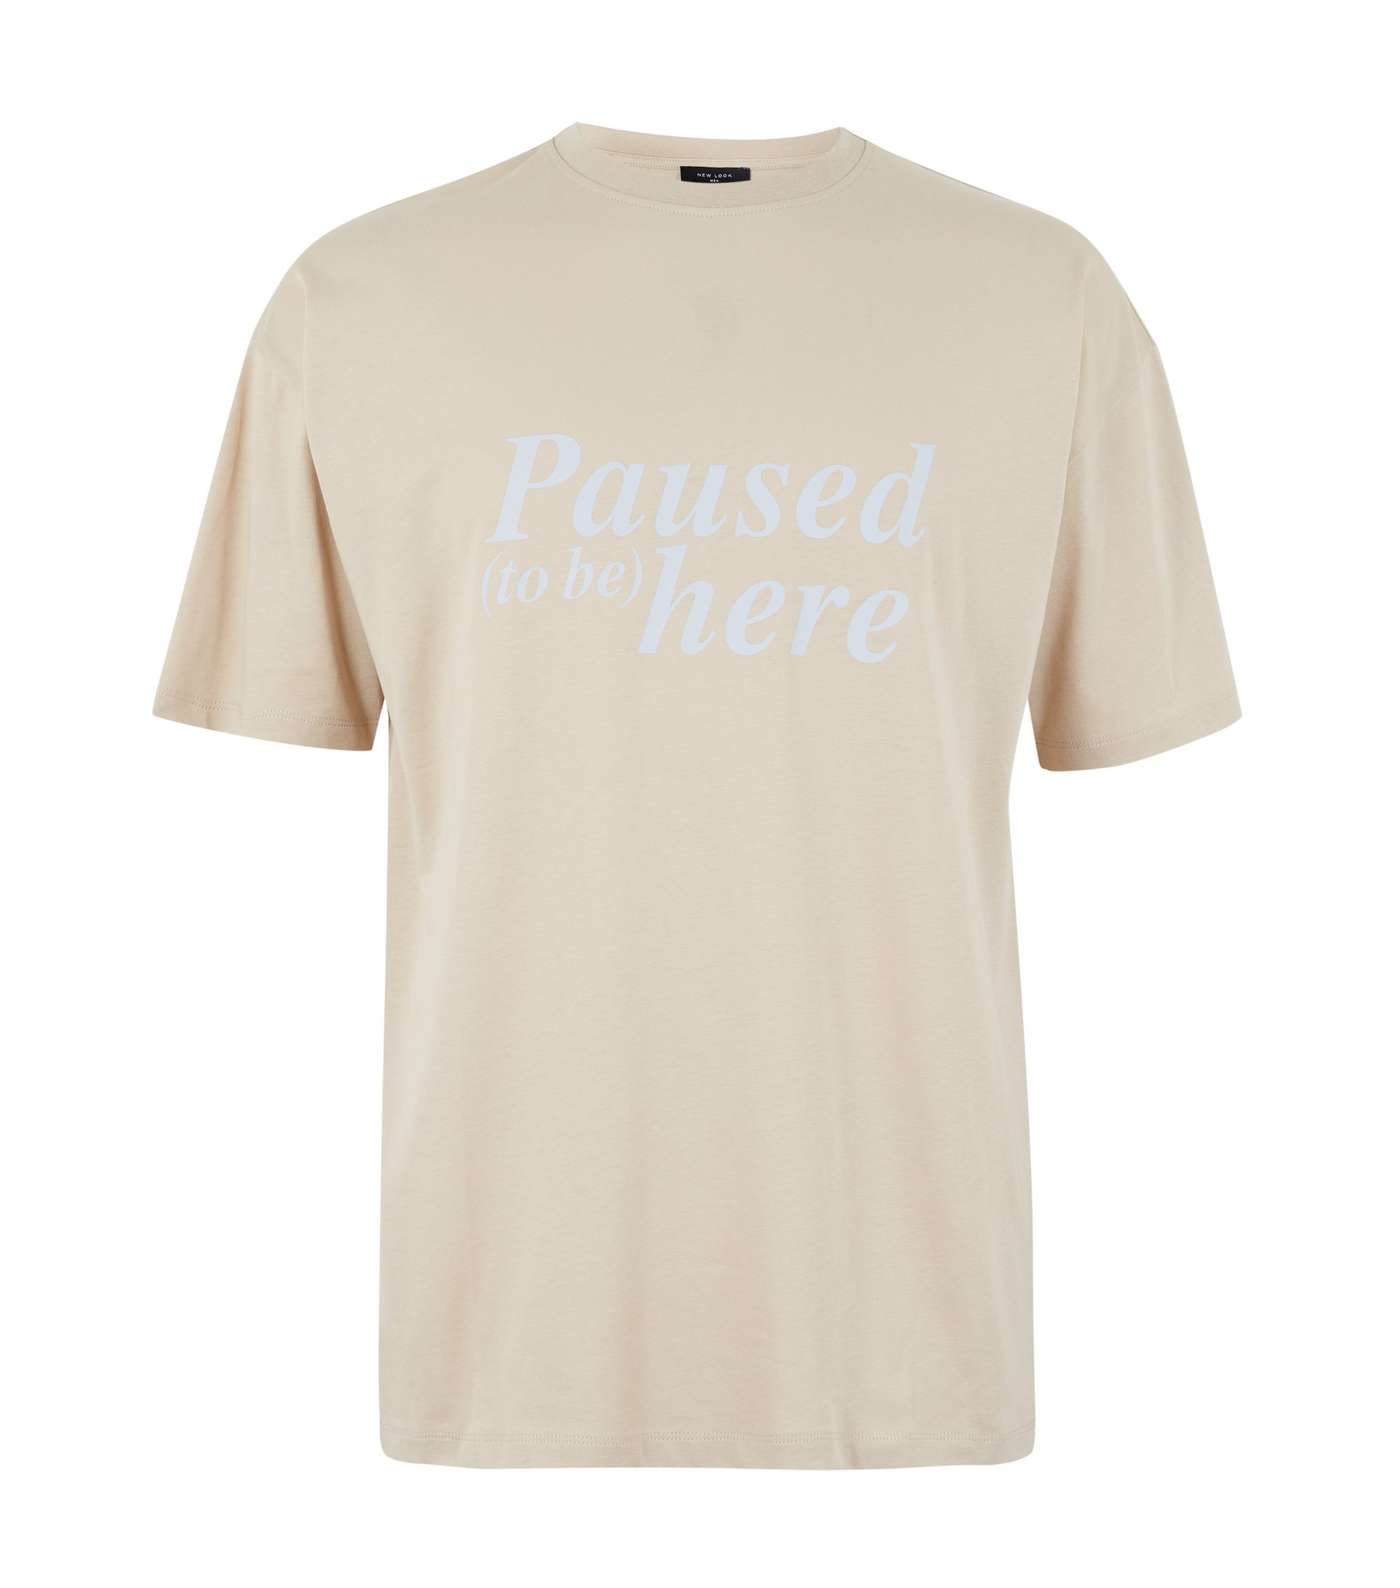 Stone Paused To Be Here Slogan T-Shirt